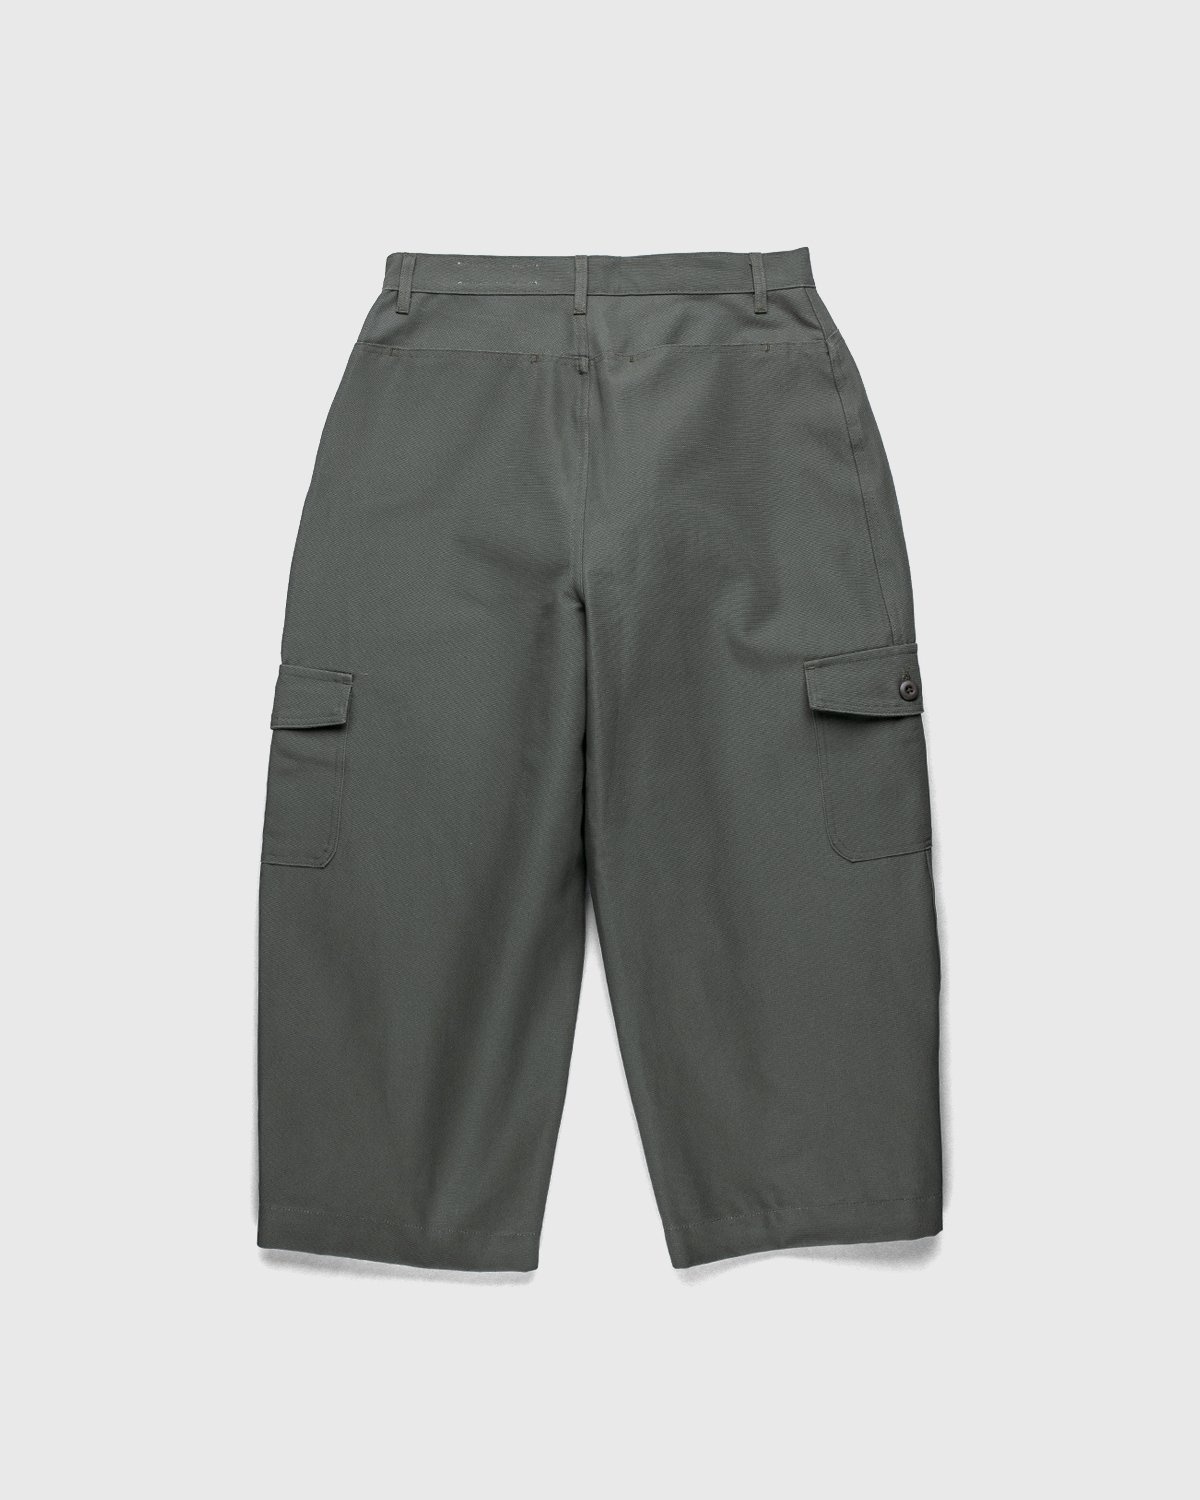 Darryl Brown – Japanese Cargo Pants Military Olive - Cargo Pants - Green - Image 2